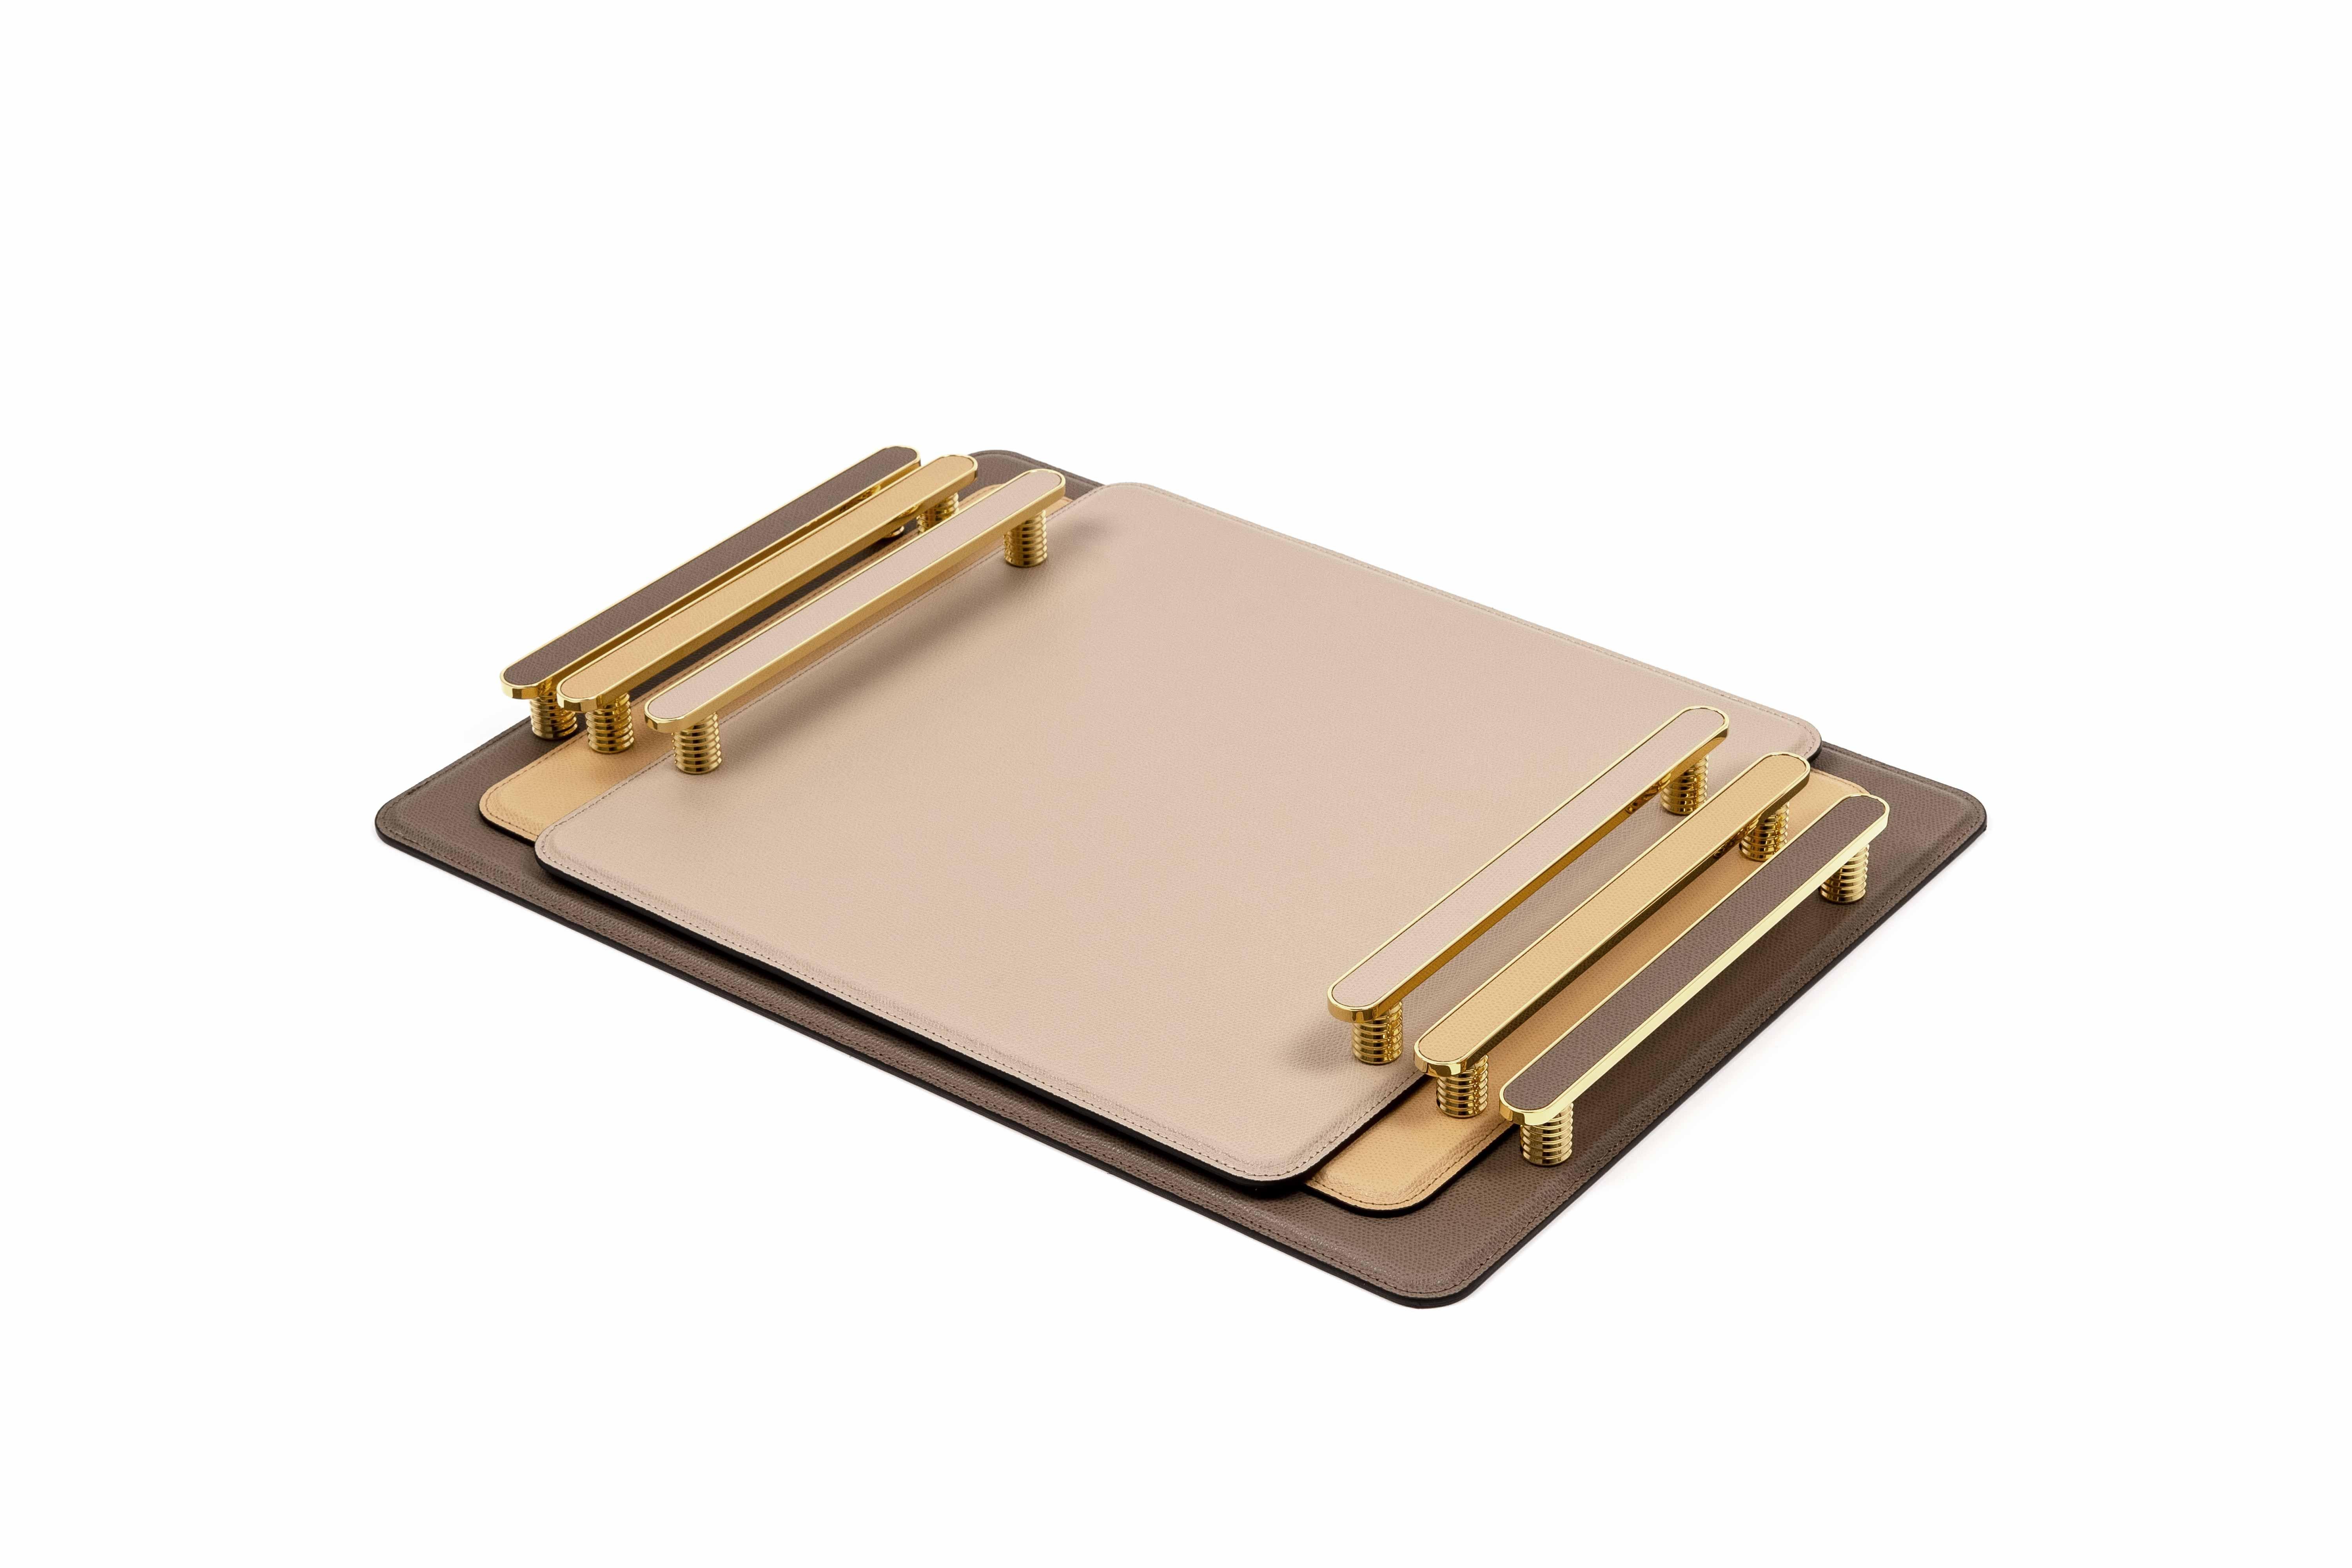 Modern 21st Century Venaria Serving Leather Tray with Brass Handles Handmade in Italy For Sale